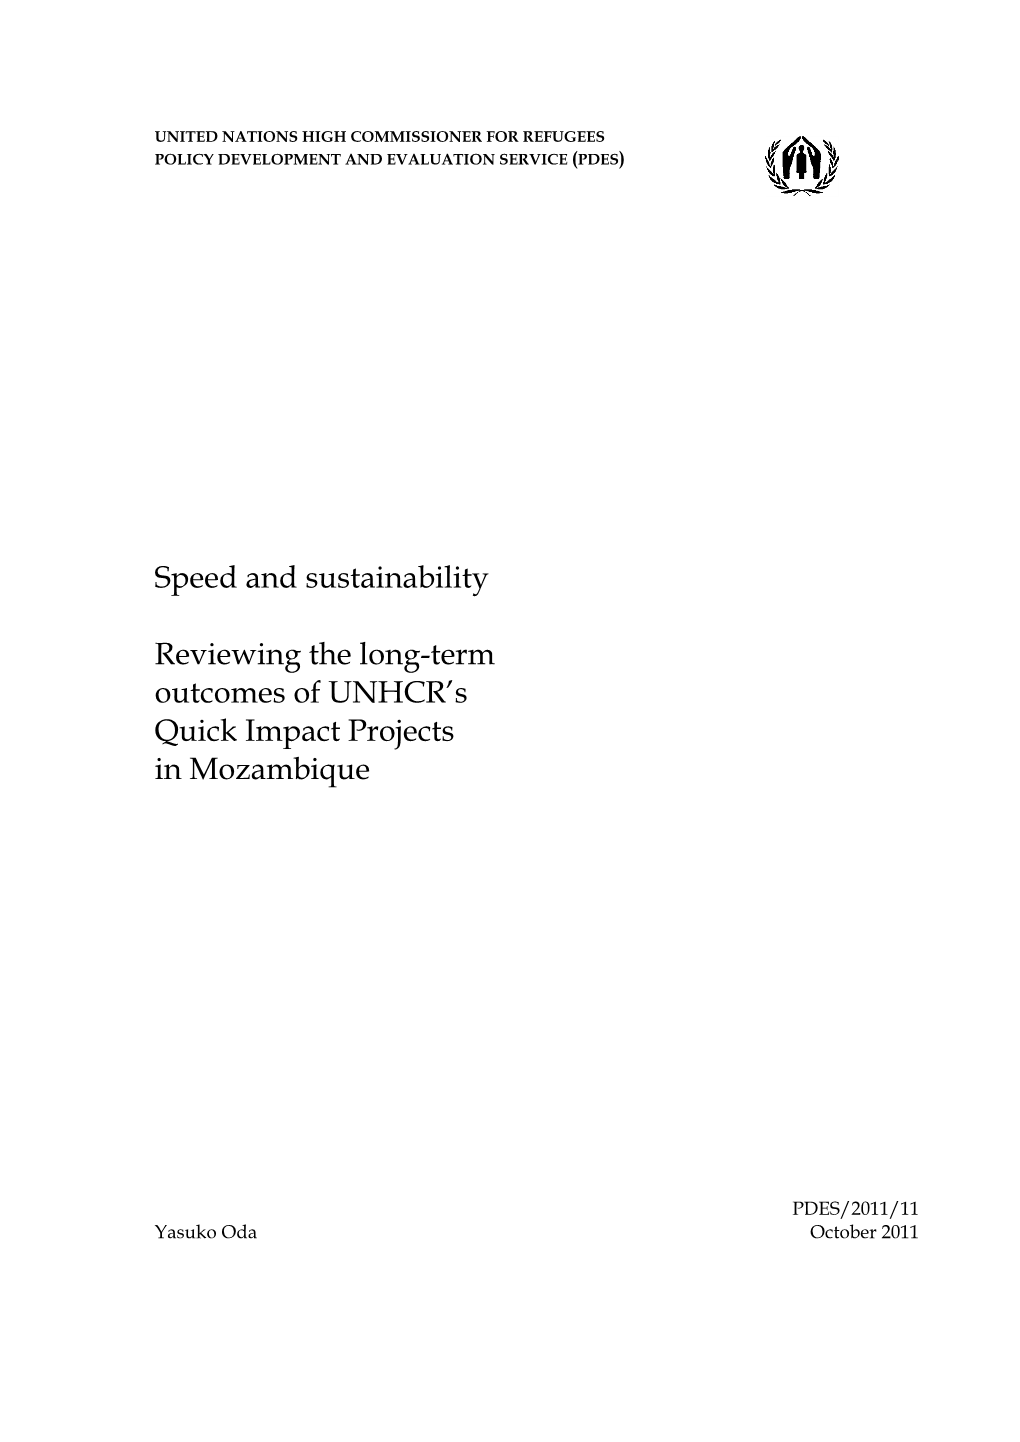 Speed and Sustainability Reviewing the Long-Term Outcomes Of